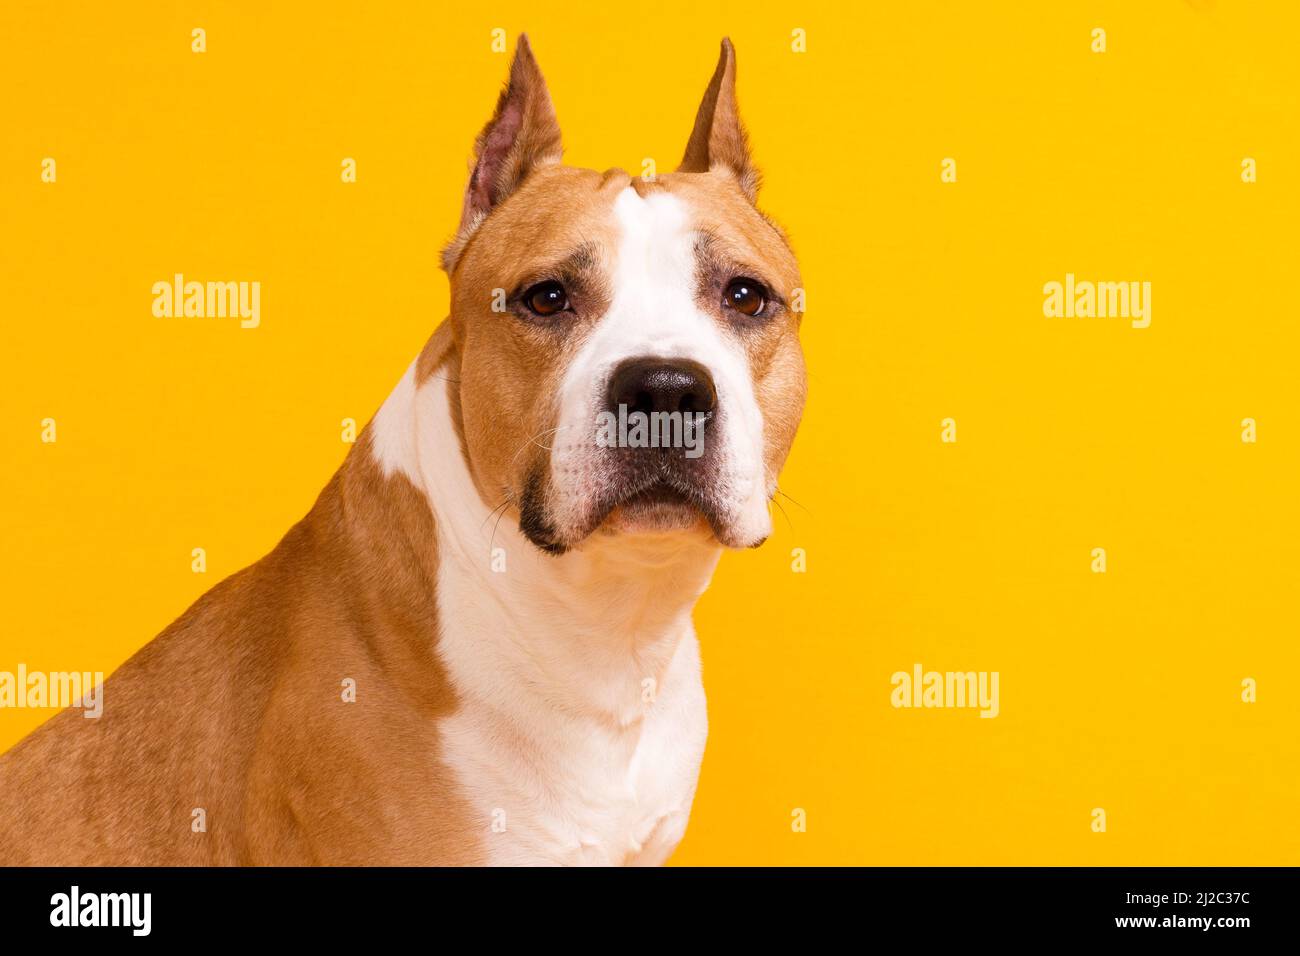 dog breed American Staffordshire Terrier looks on a yellow background. High quality photo Stock Photo